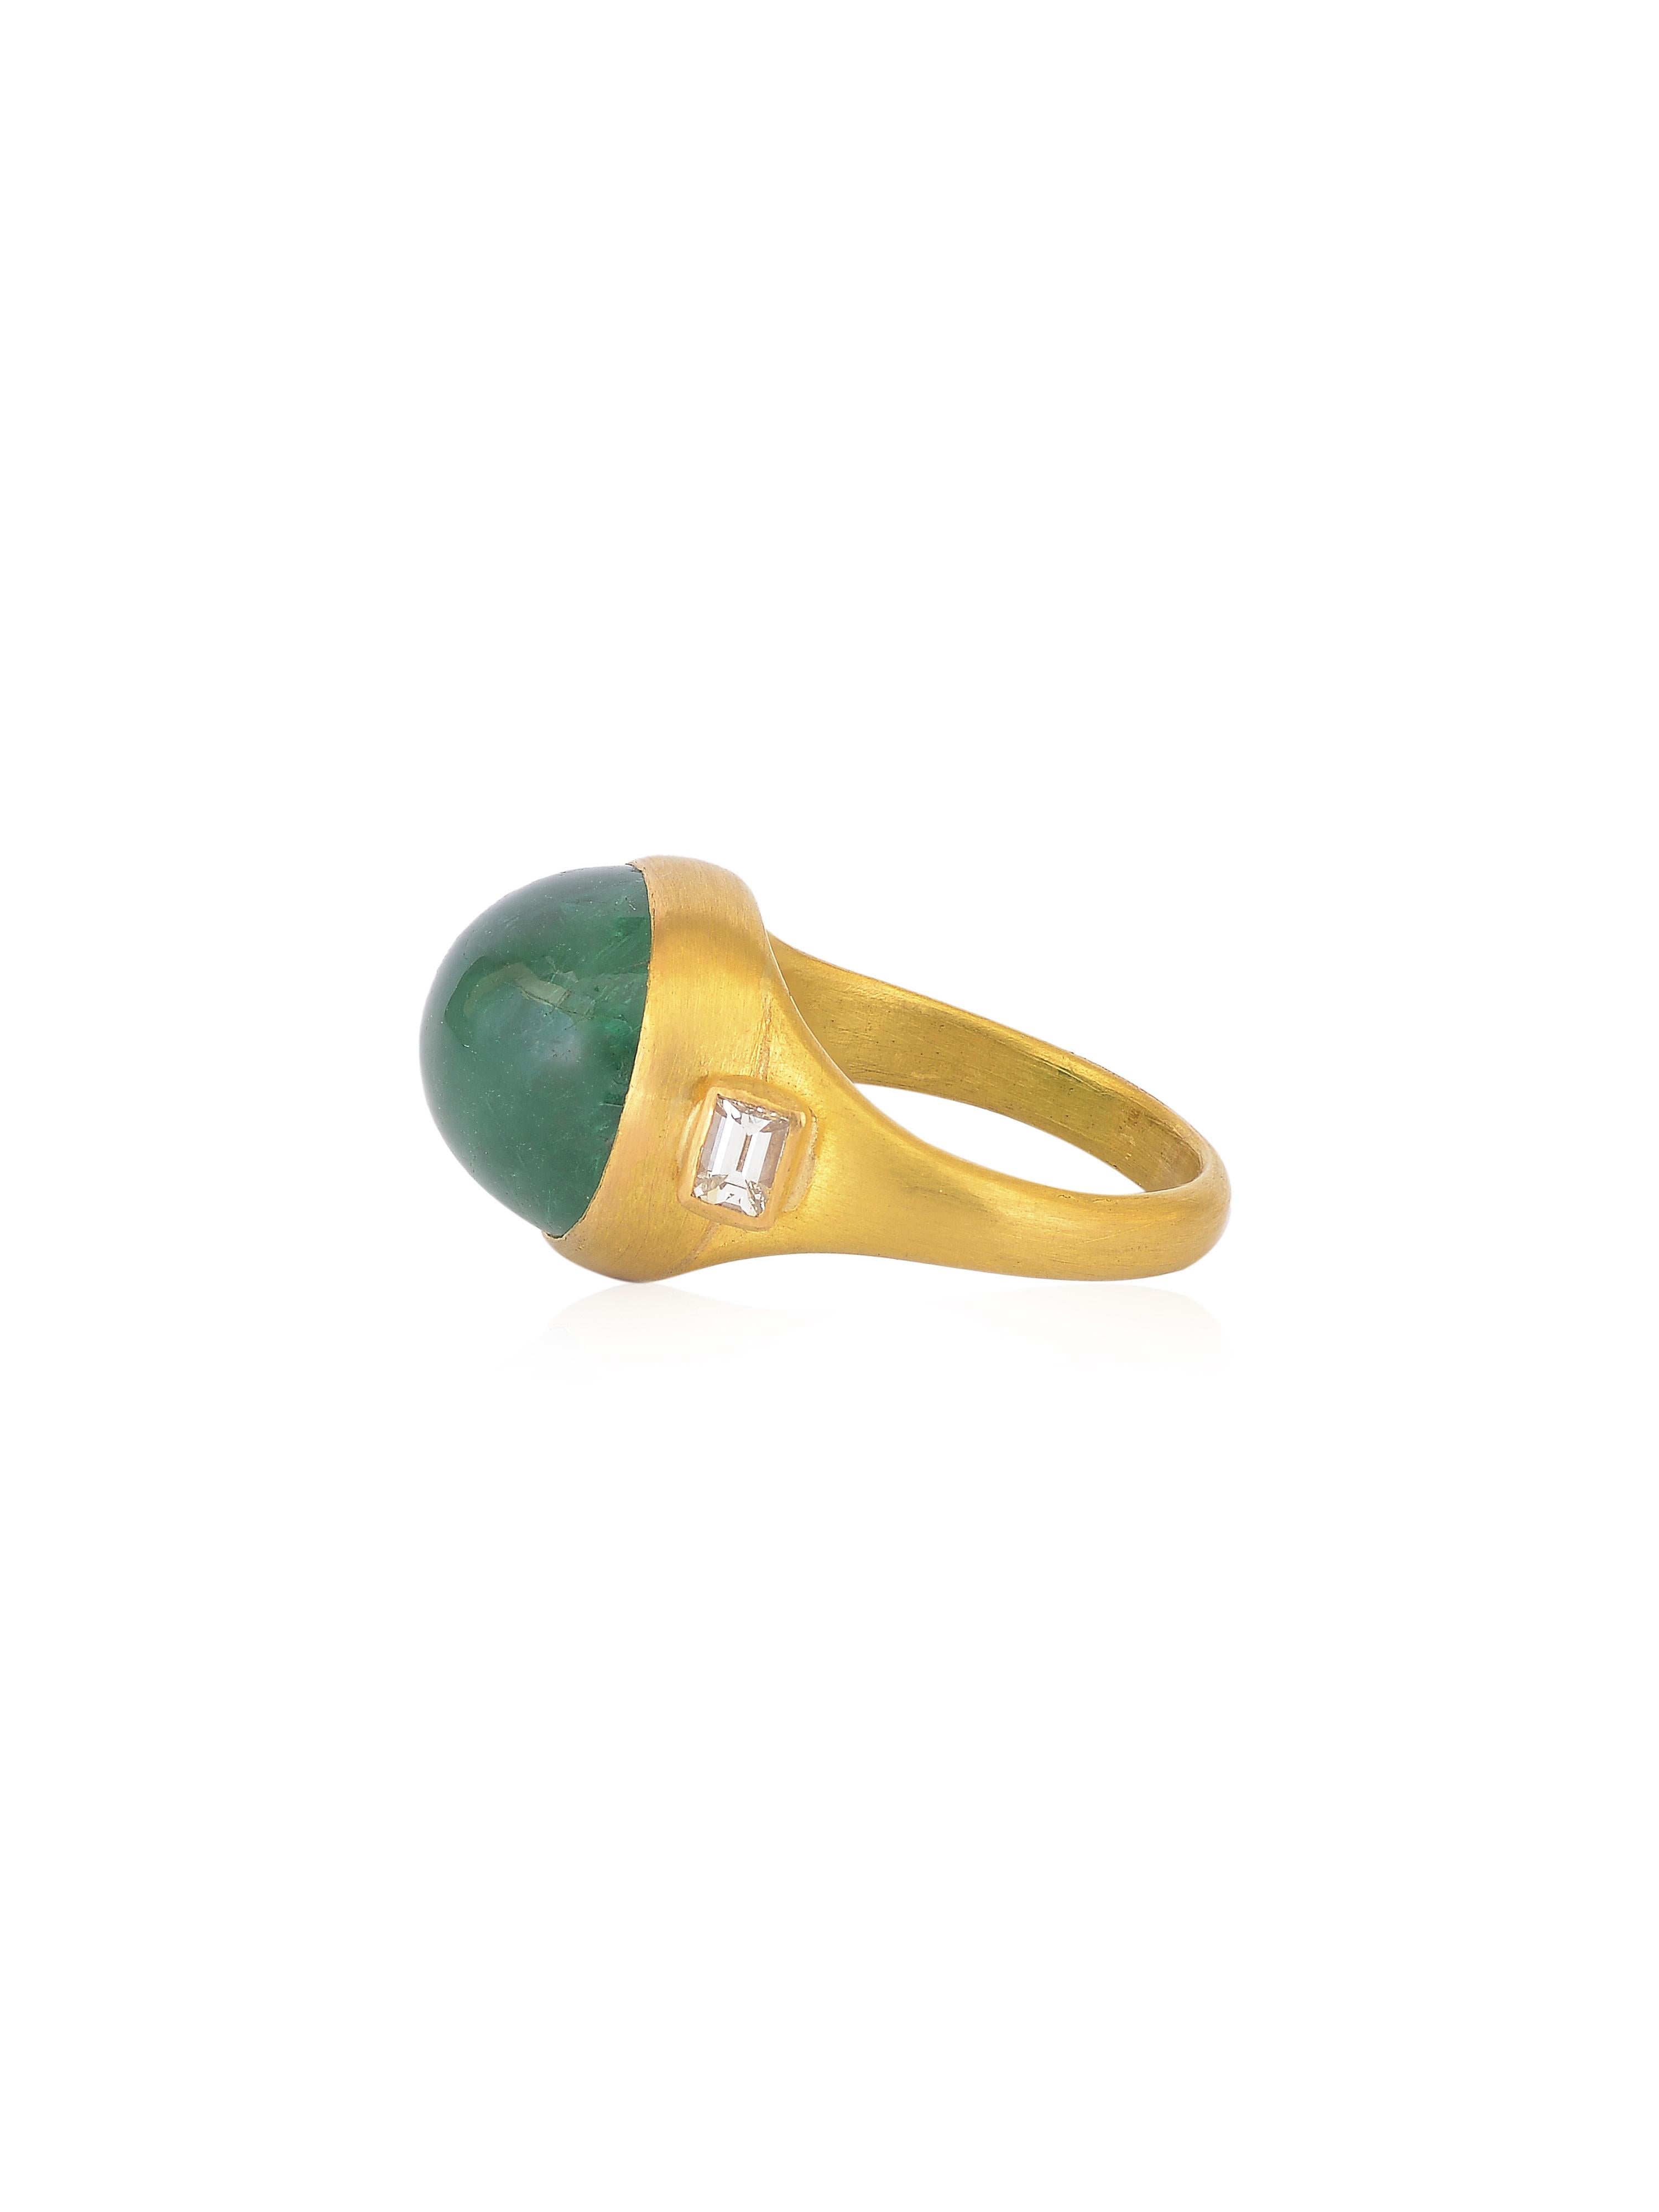 Emerald Cabochon Statement Ring with Diamond Baguettes Handmade in 22k Gold For Sale 1